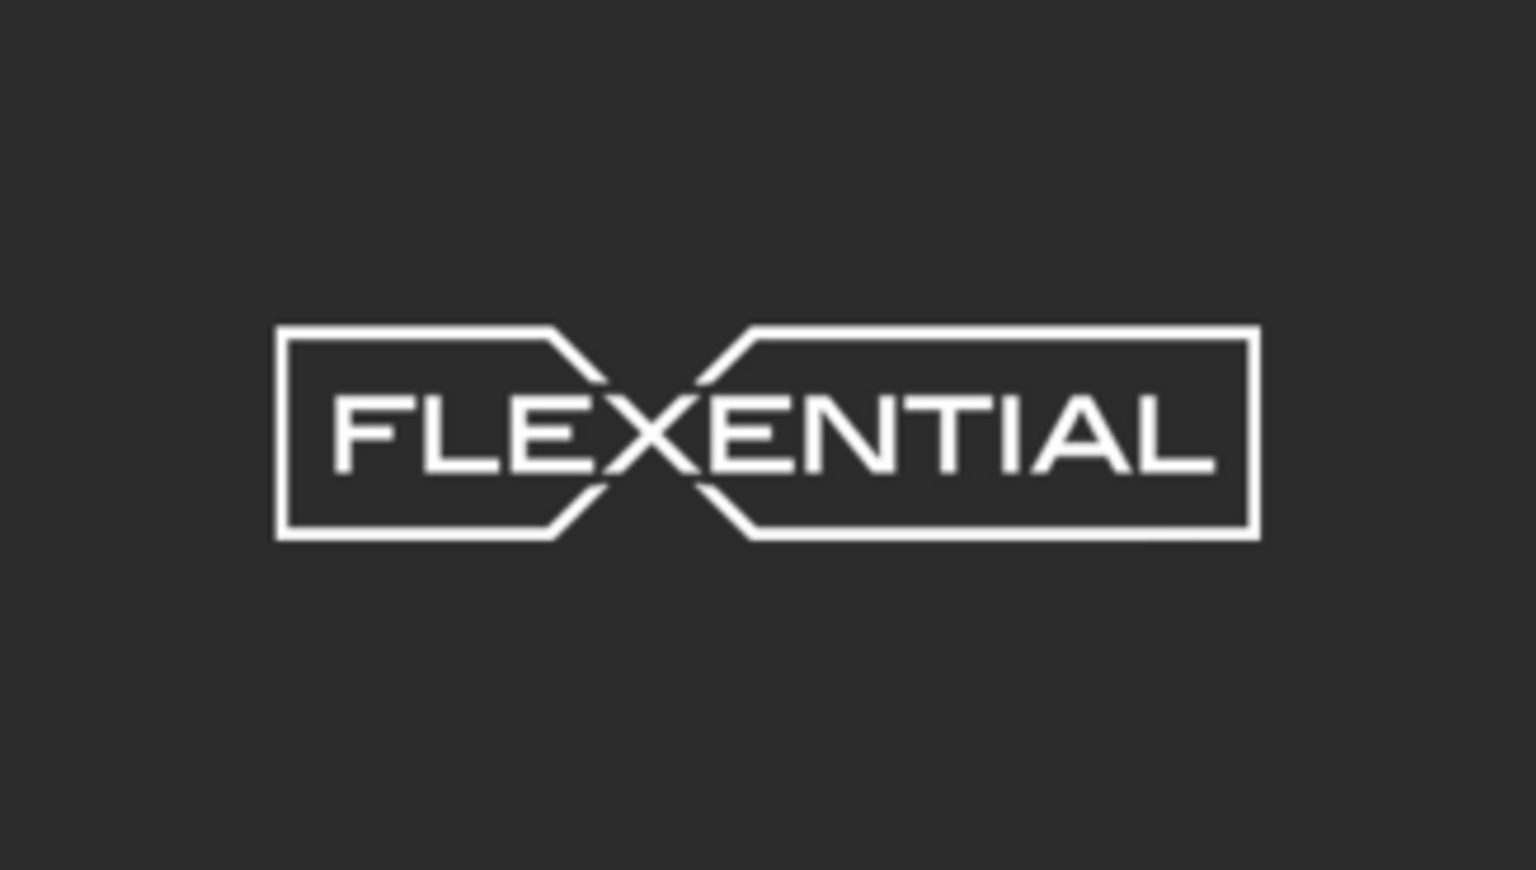 Read the Flexential customer story